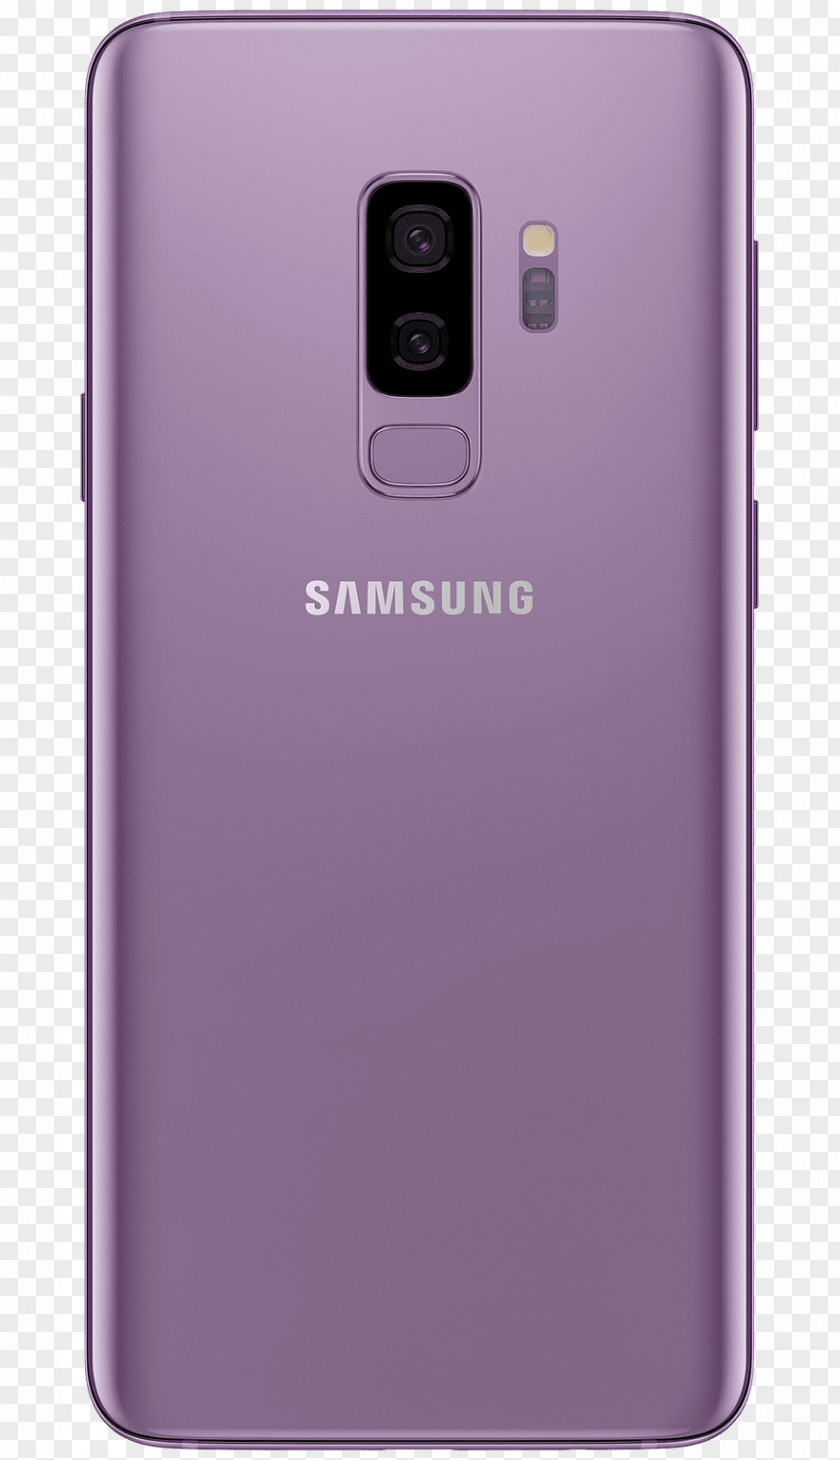 Samsung Galaxy S Plus Telephone Android Lilac Purple PNG